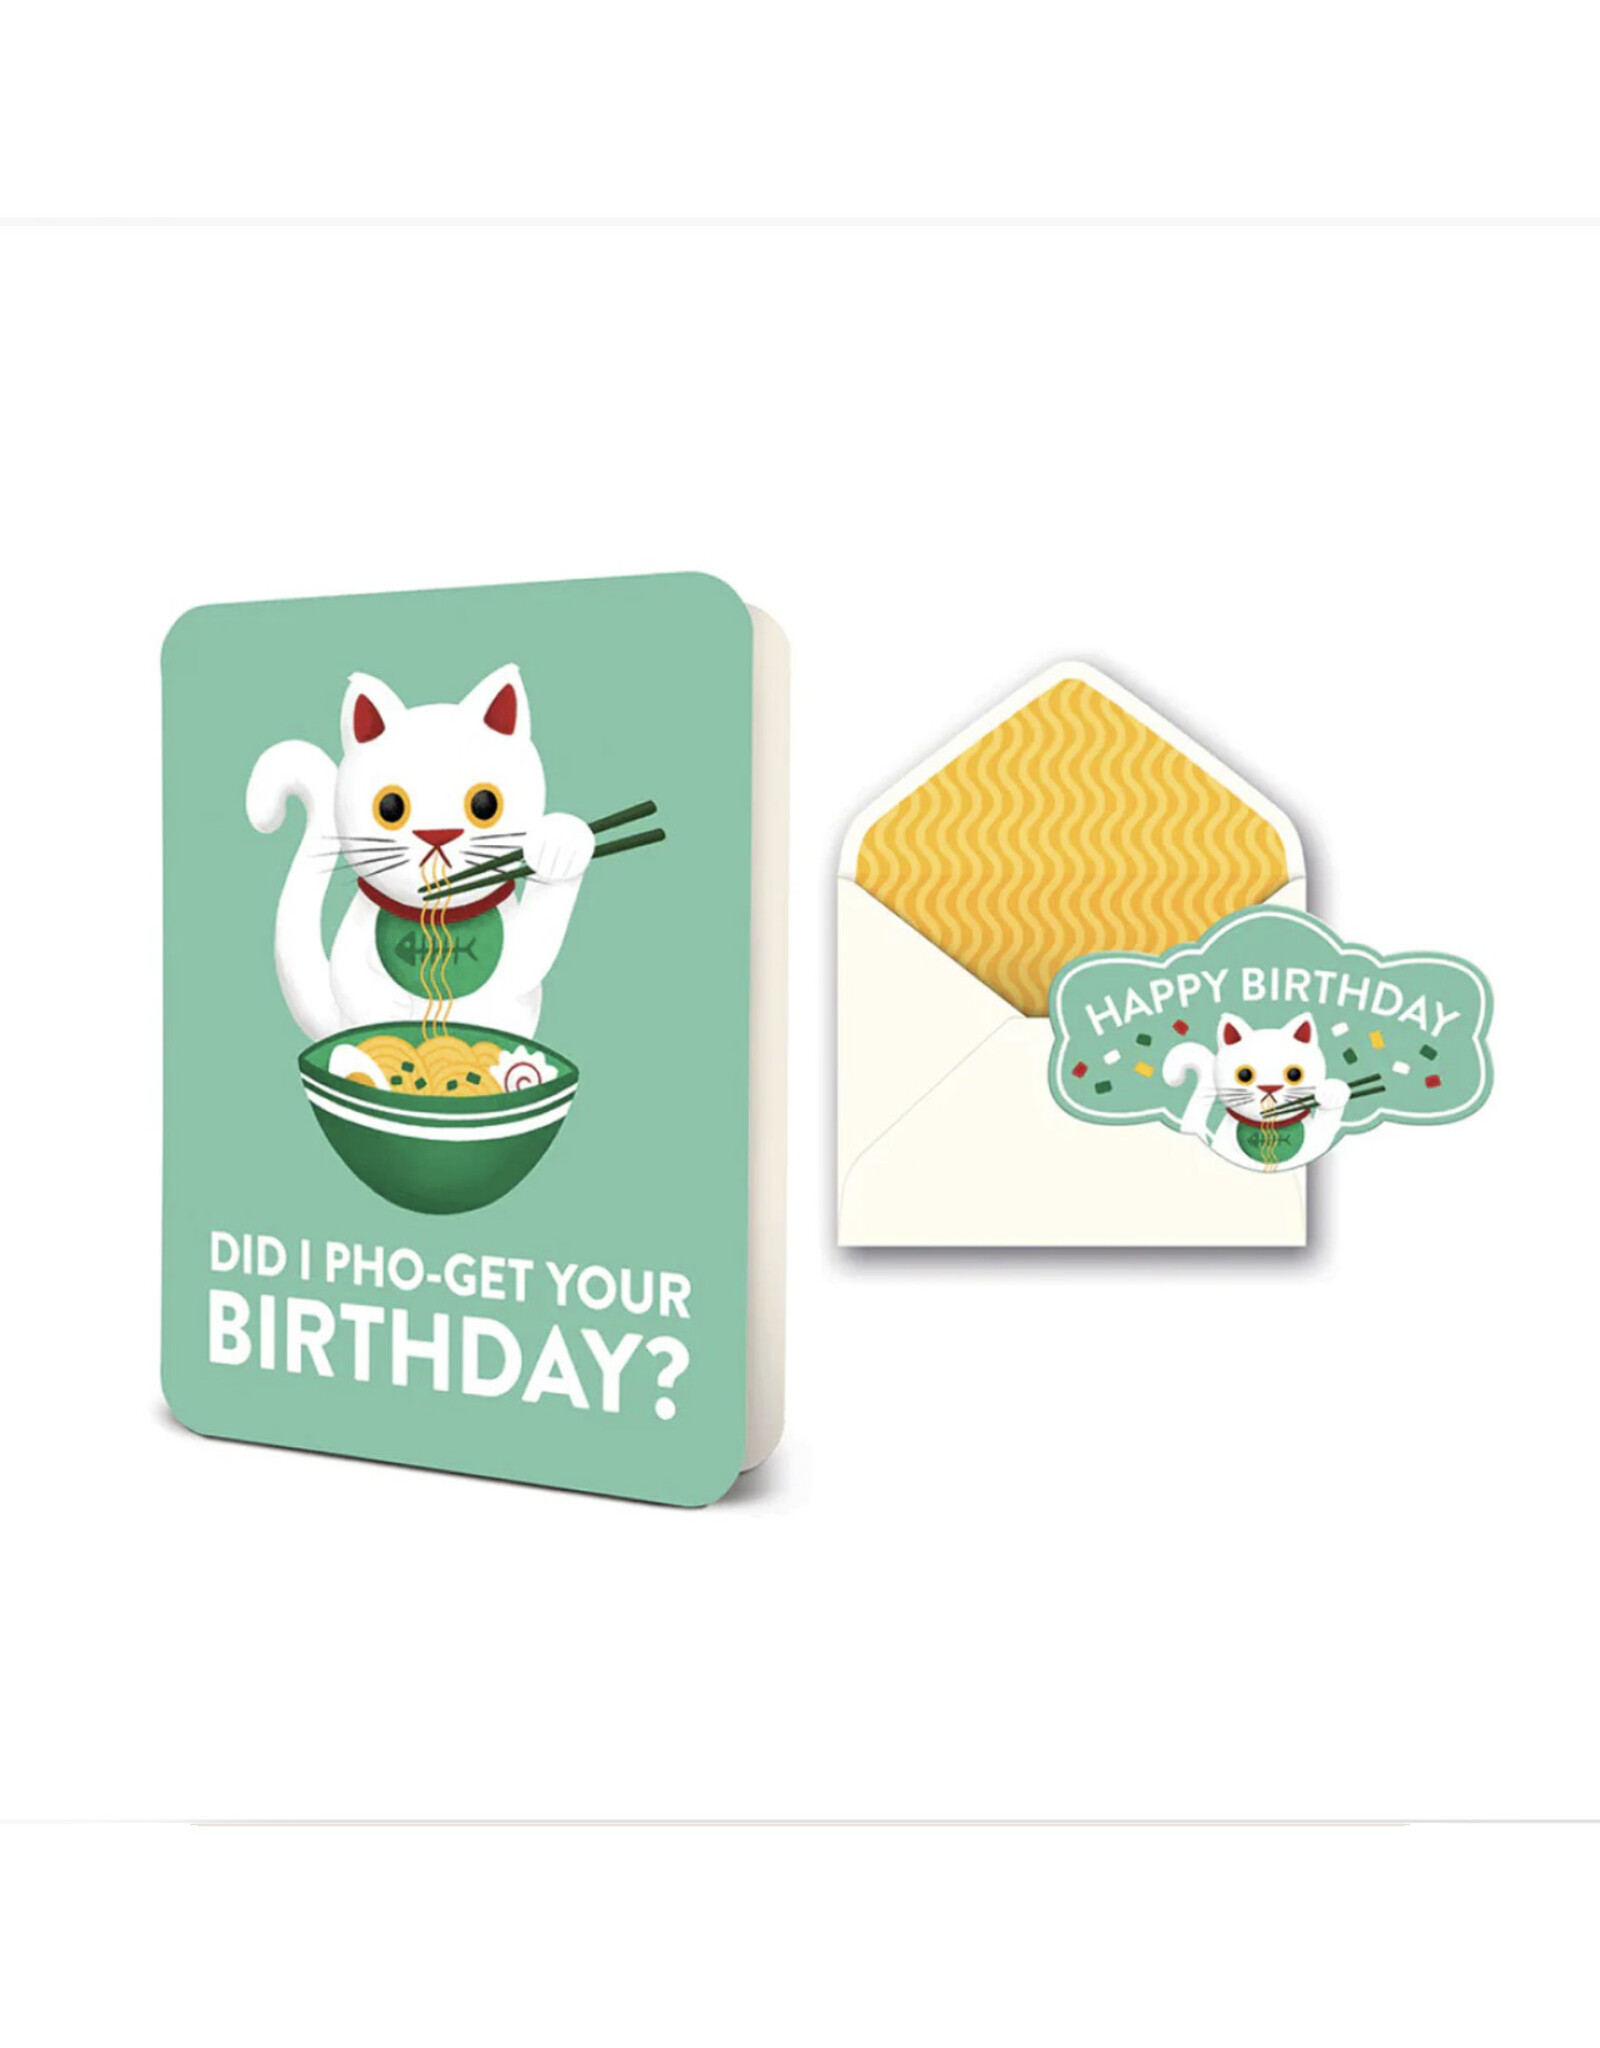 Pho-Get Your Birthday Greeting Card